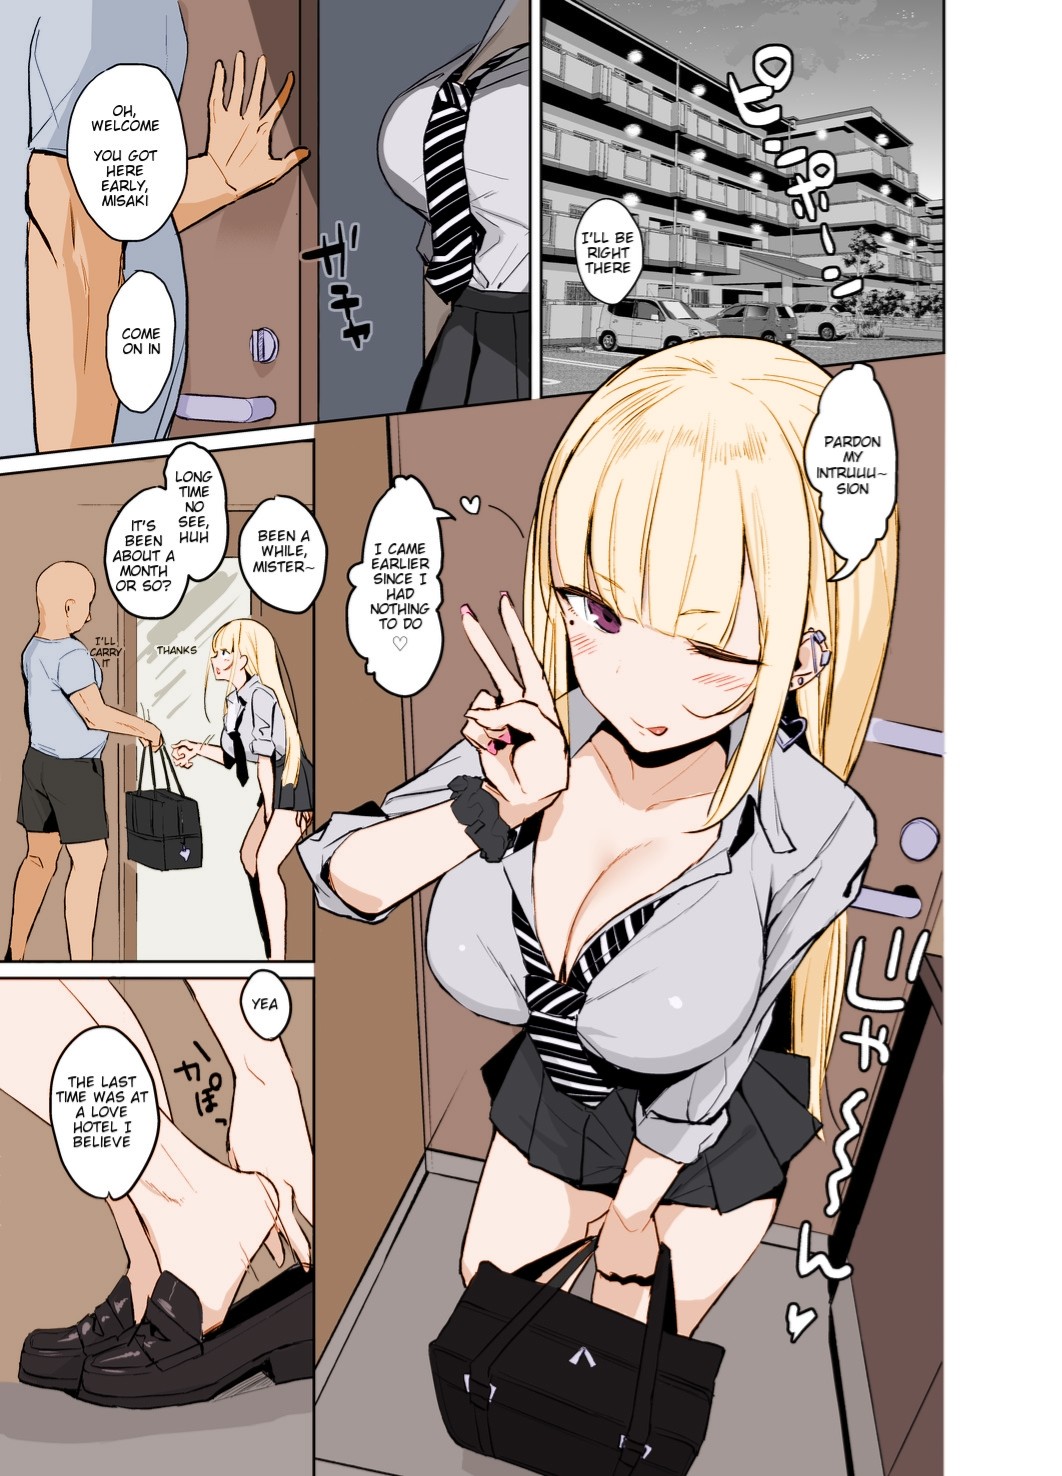 Hentai Manga Comic-A Lewd Big Breasted Schoolgirl Gets Fucked By An Old Guy With a Big Dick-Read-2